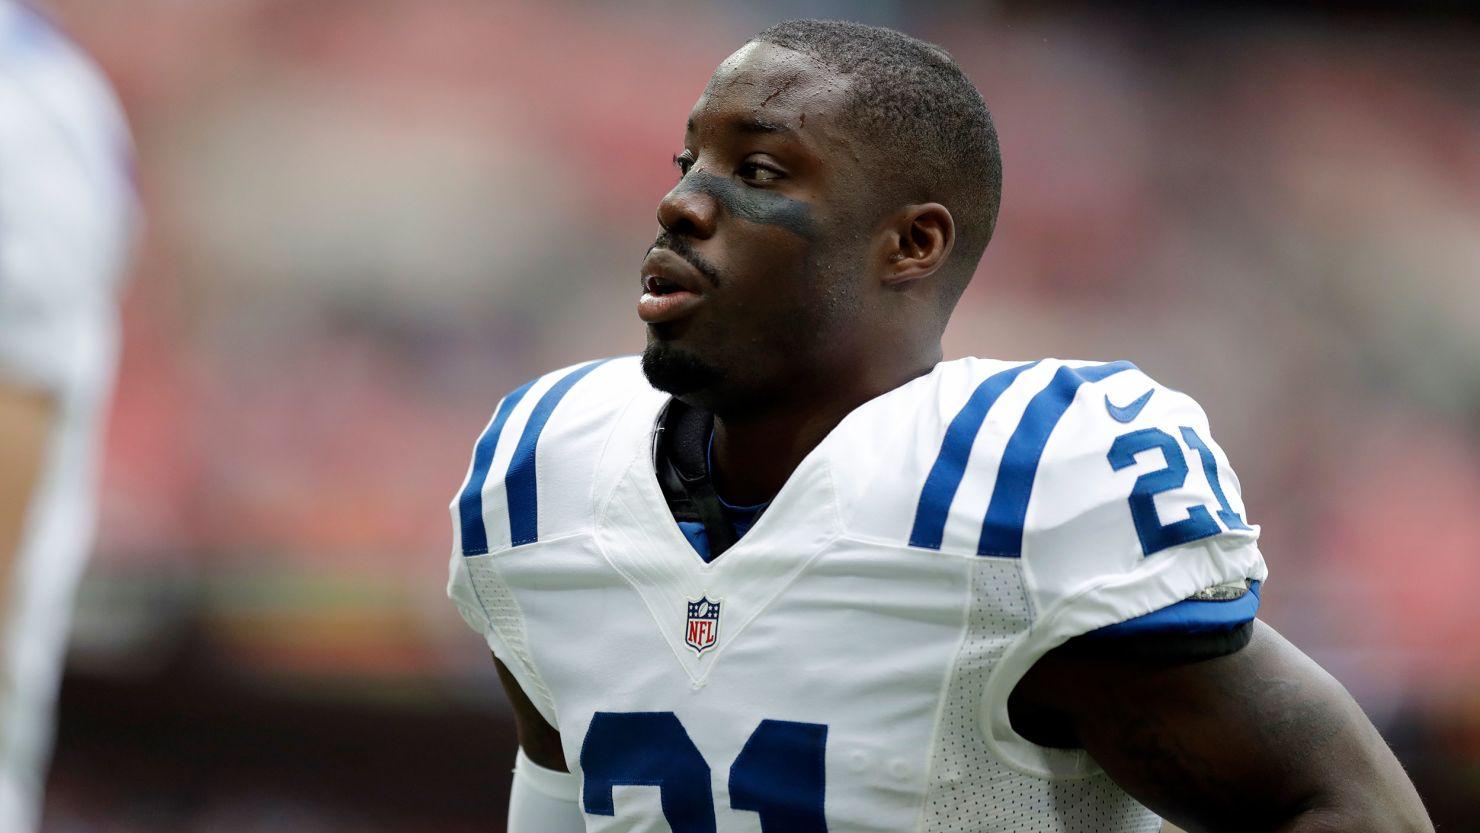 911 call released on the death of 2x Pro Bowler Vontae Davis | Found Dead in the Gym